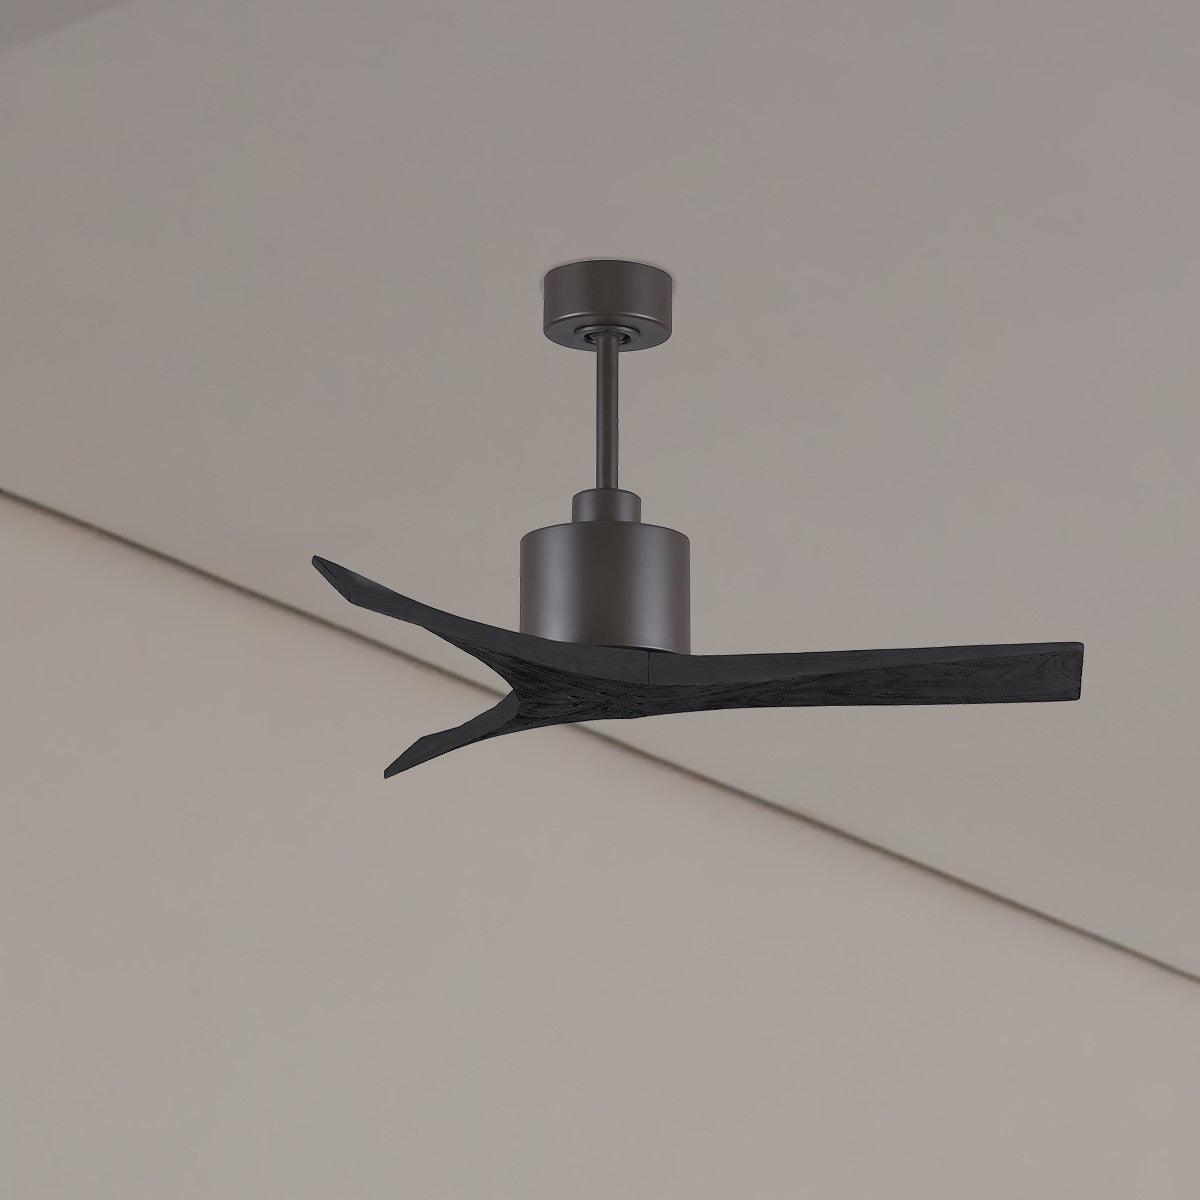 Mollywood 42 Inch Propeller Outdoor Ceiling Fan With Remote And Wall Control